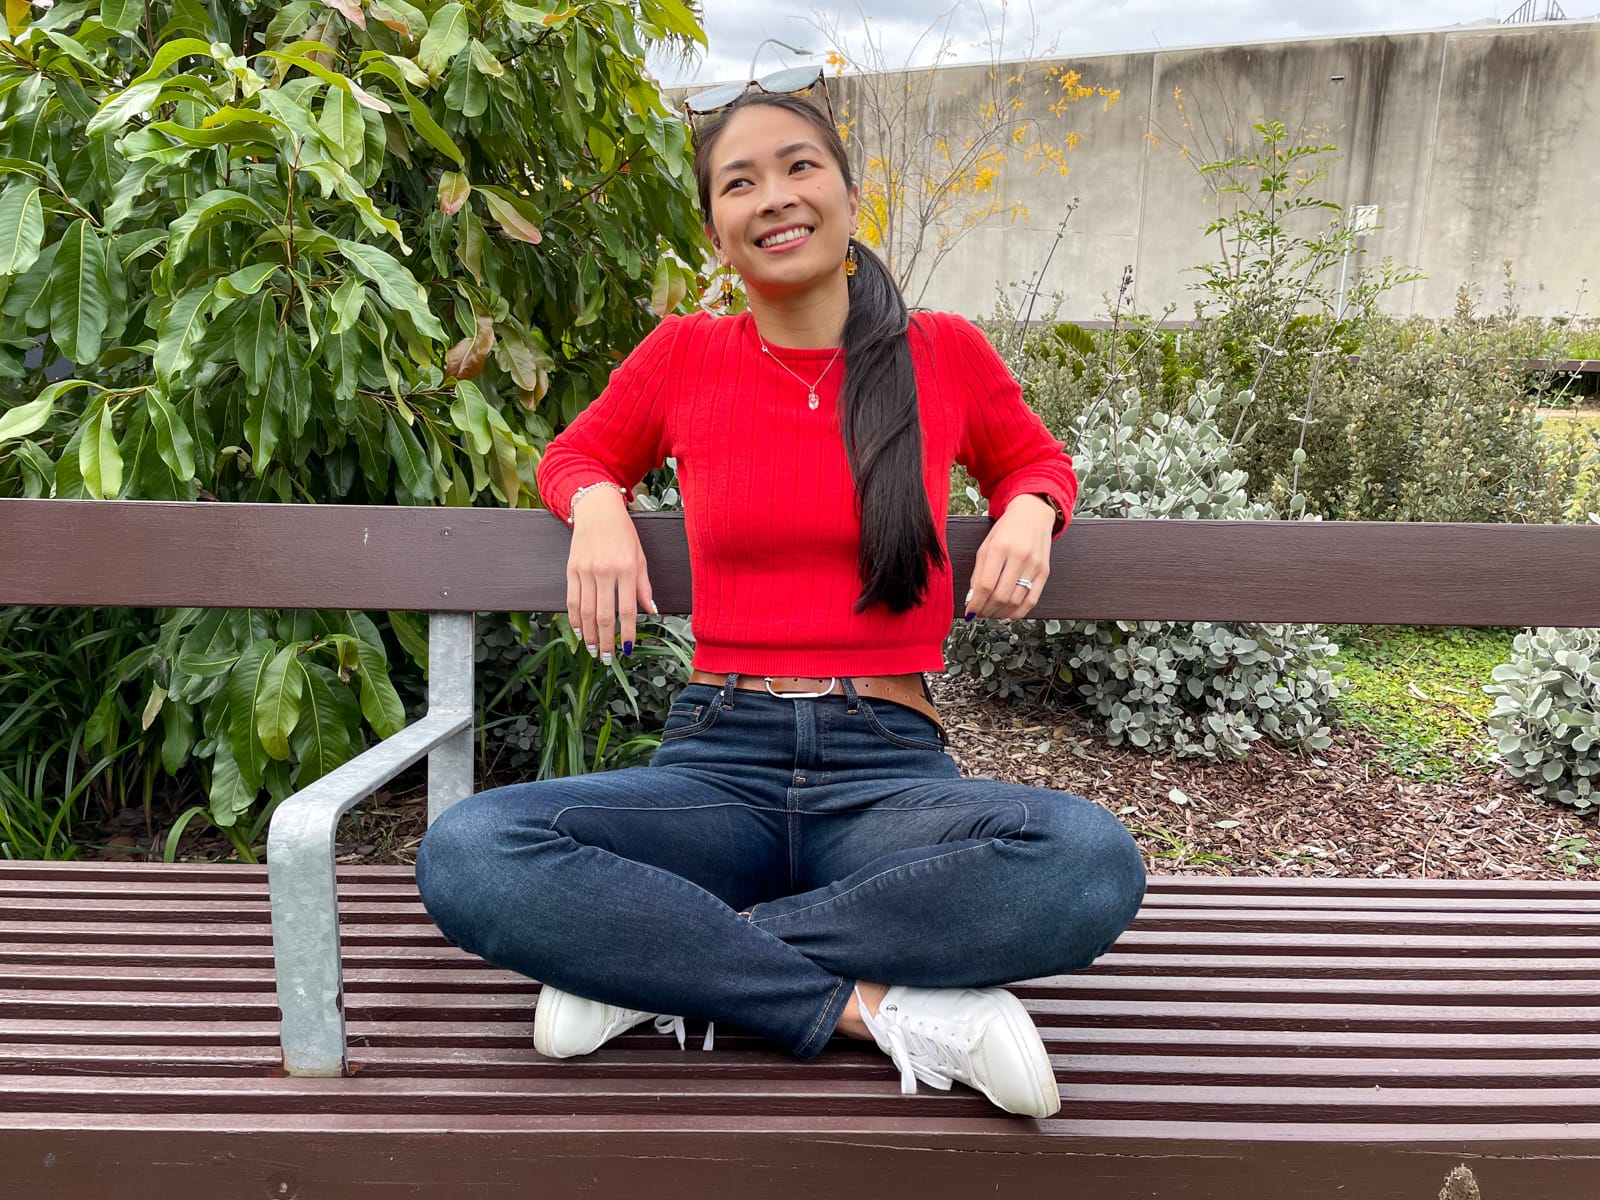 An Asian woman with long dark hair tied back in a low ponytail, sitting on a wooden park bench with her legs crossed. She is wearing a red long-sleeved top and dark blue jeans, with white sneakers. She has her elbows resting on the back of the bench.